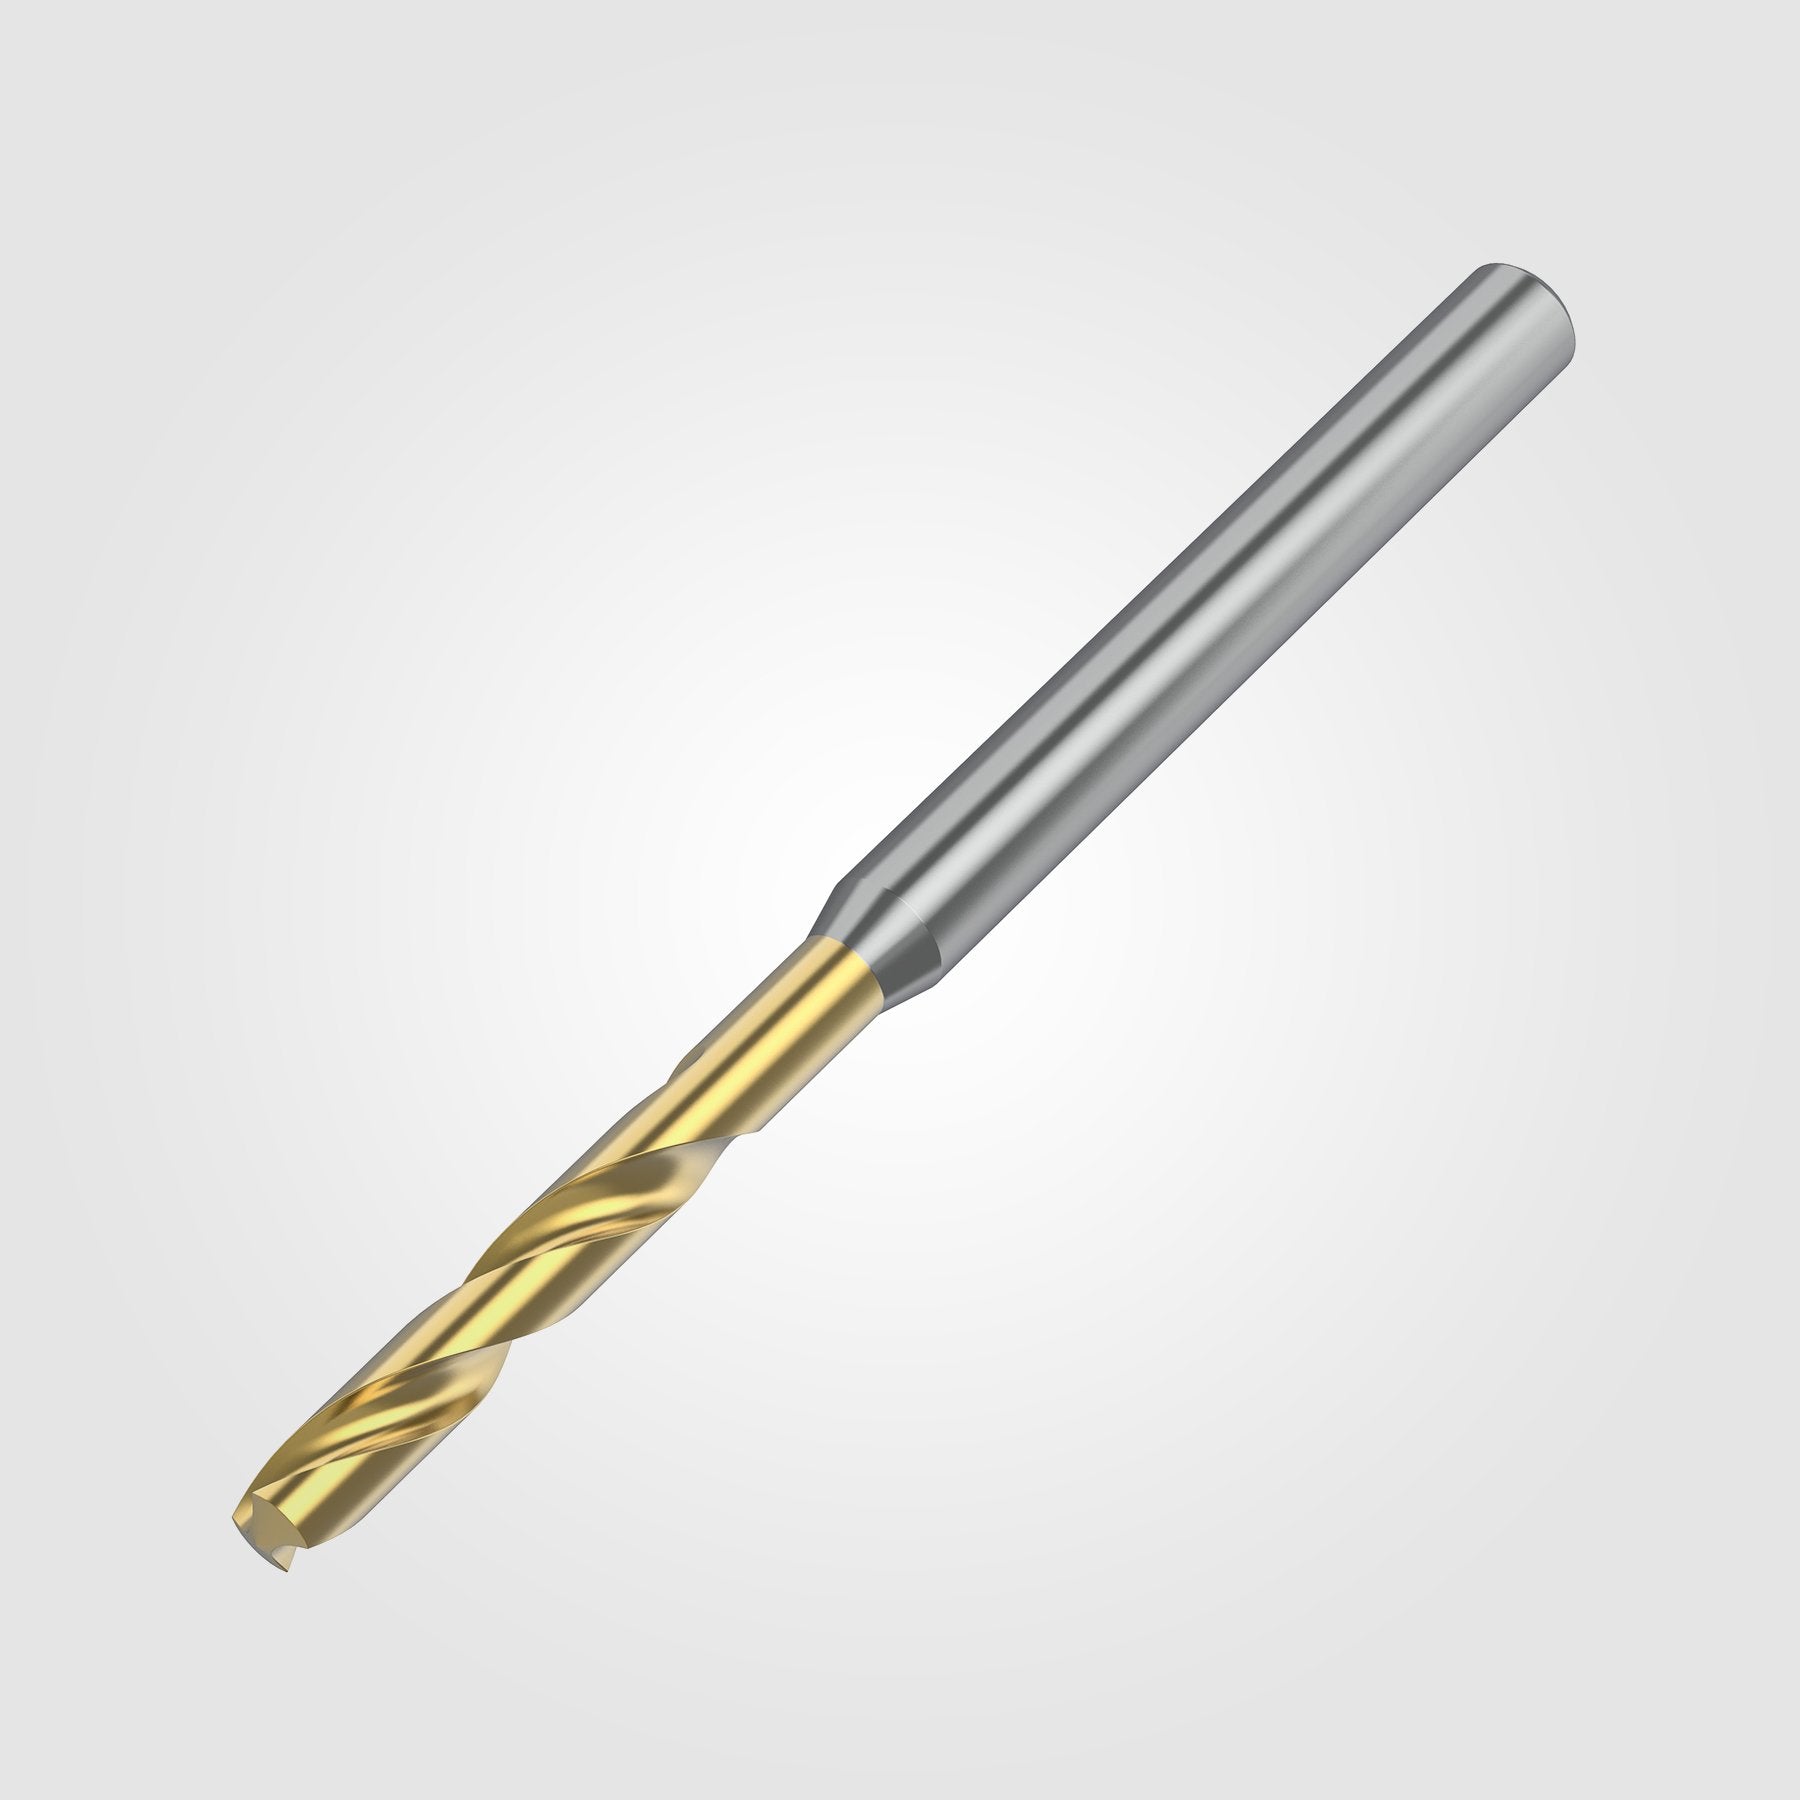 GOdrill (THROUGH COOLANT) | 2.82mm / .1110" / 3xD | SOLID CARBIDE DRILL | 4148855